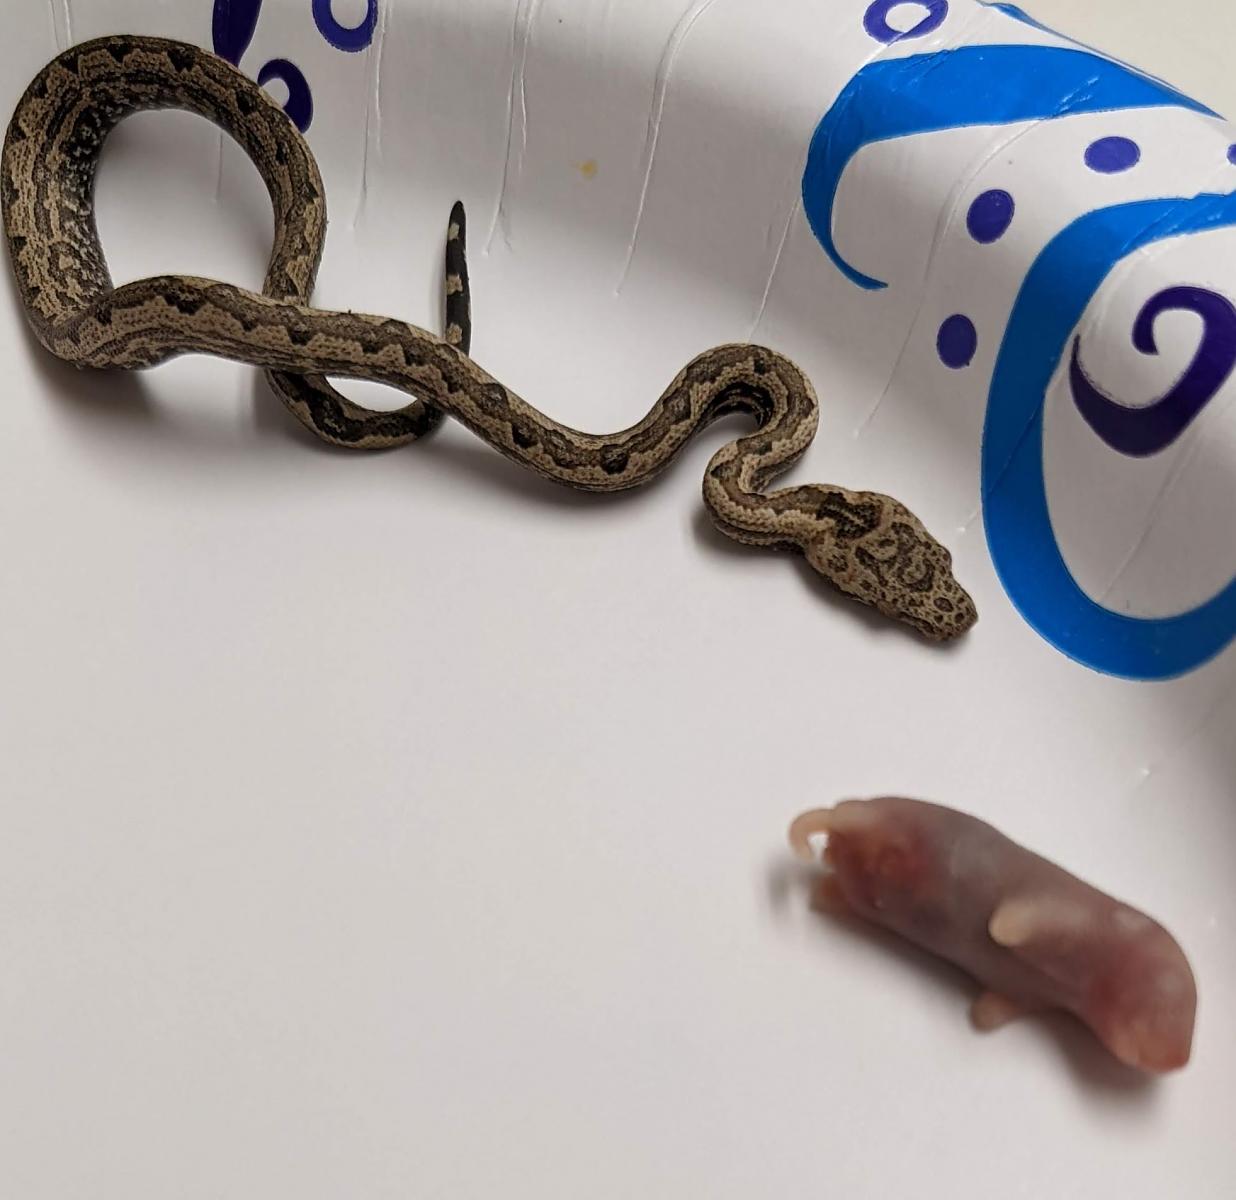 Baby Isabelle Island Ground Boa size to food comparison